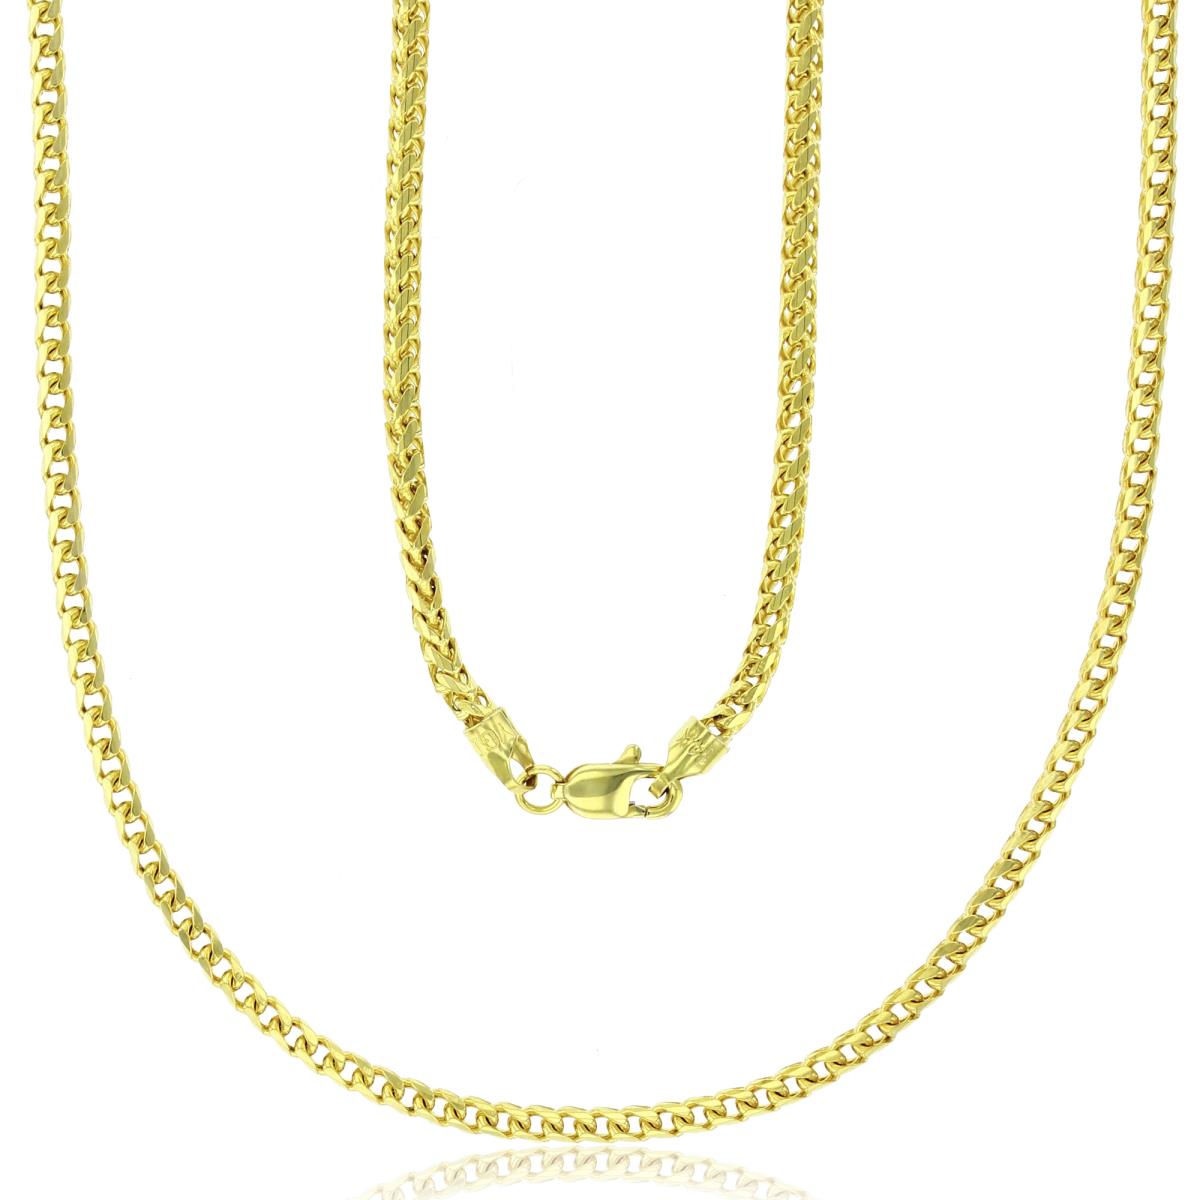 10K Yellow Gold 2.75mm 22" Solid Franco 080 Chain